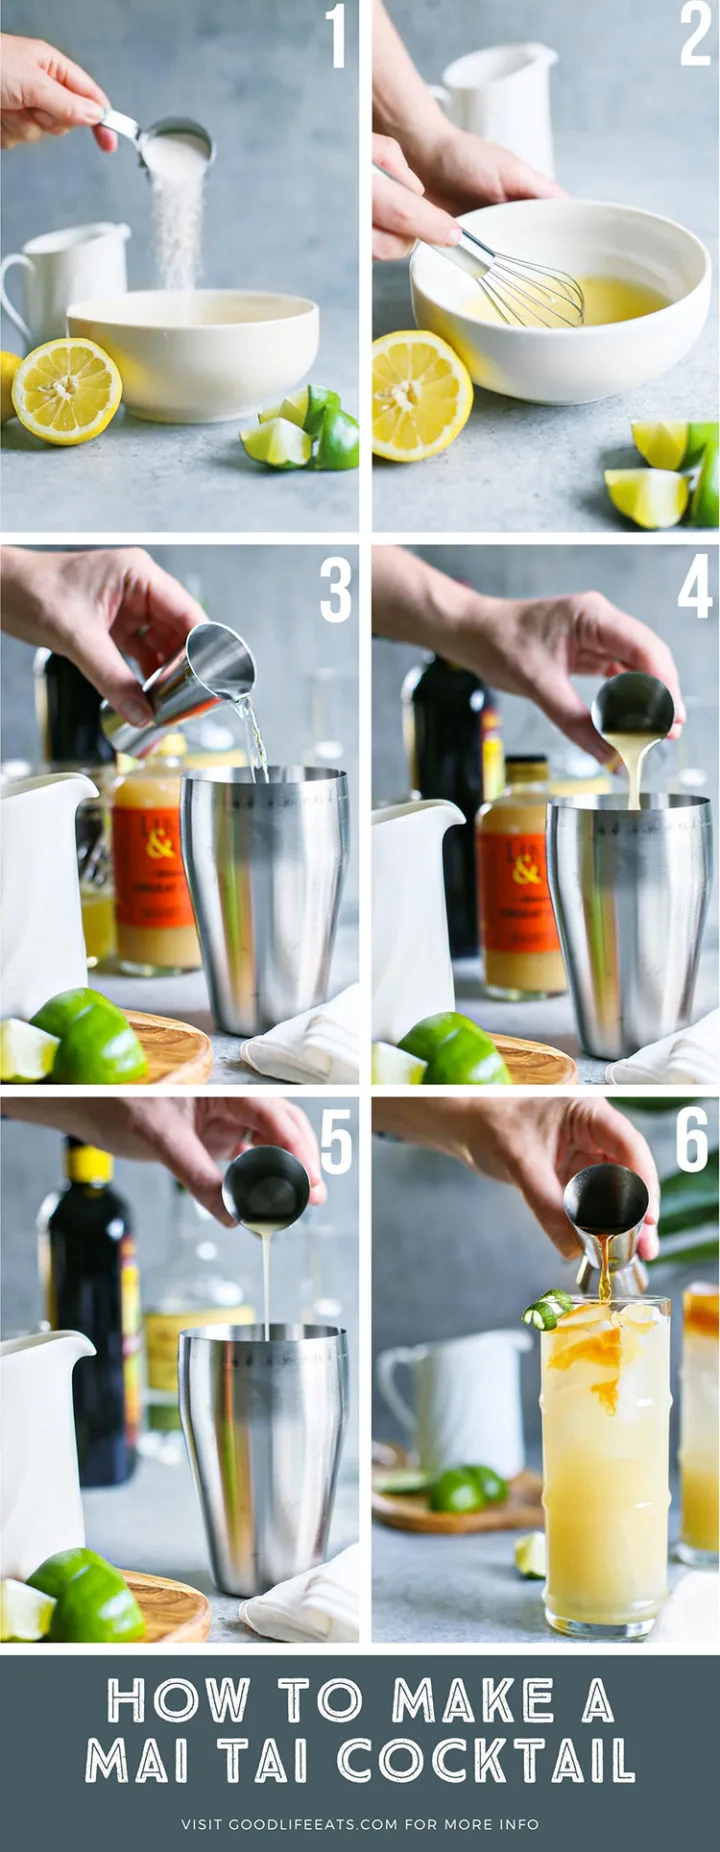 step by step photos showing how to make a mai tai cocktail